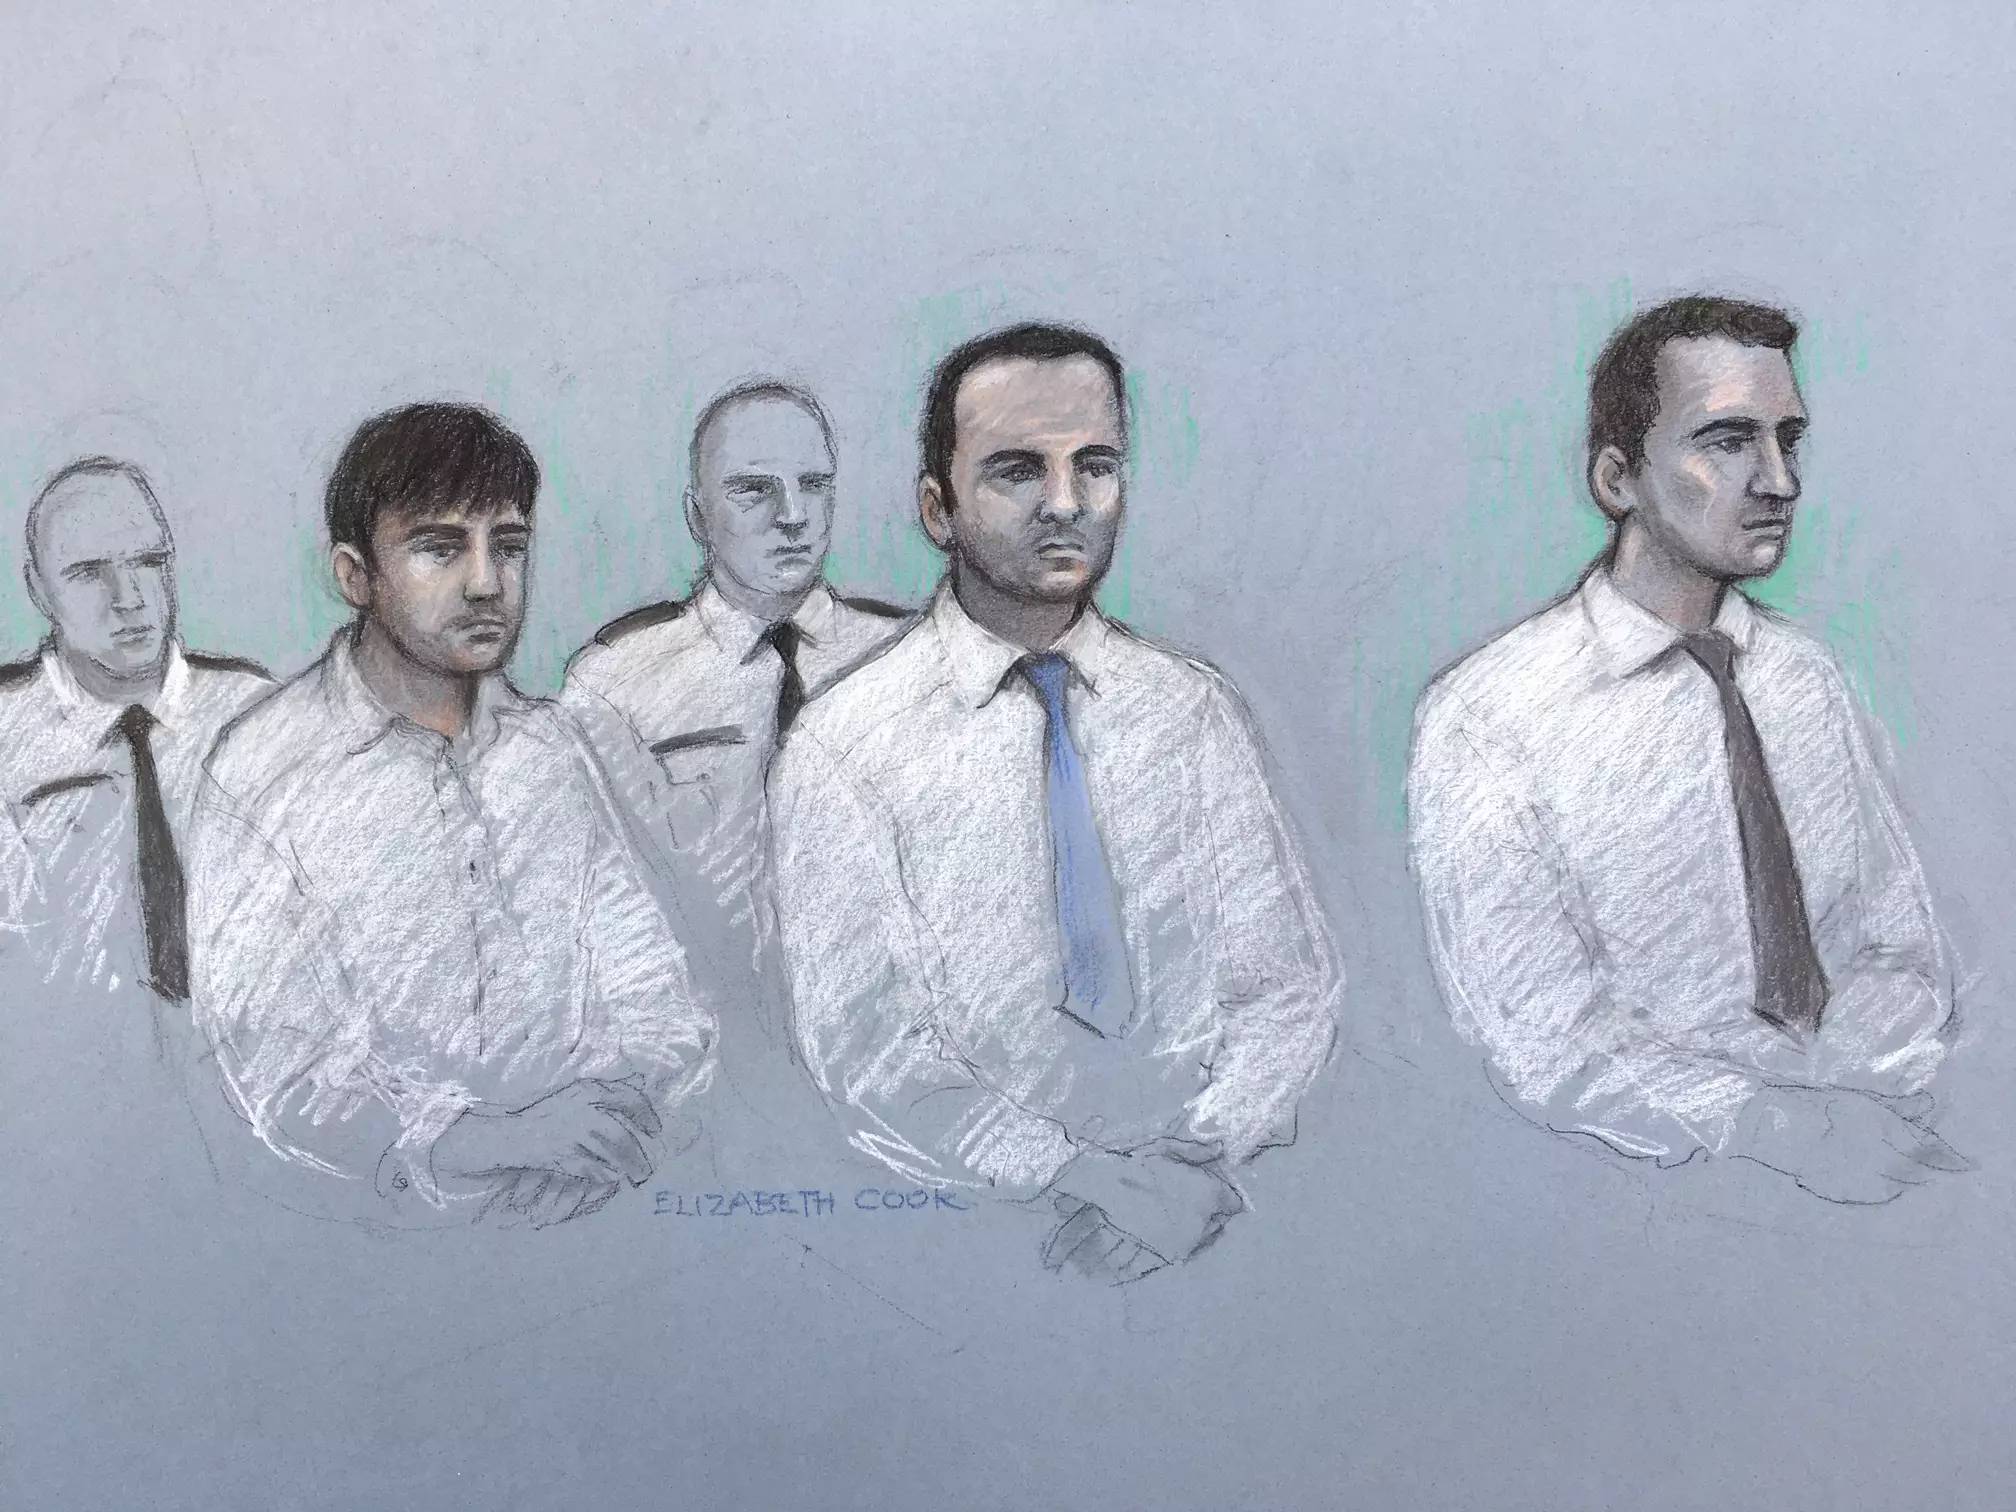 Long, Cole and Bowers sketched in court (